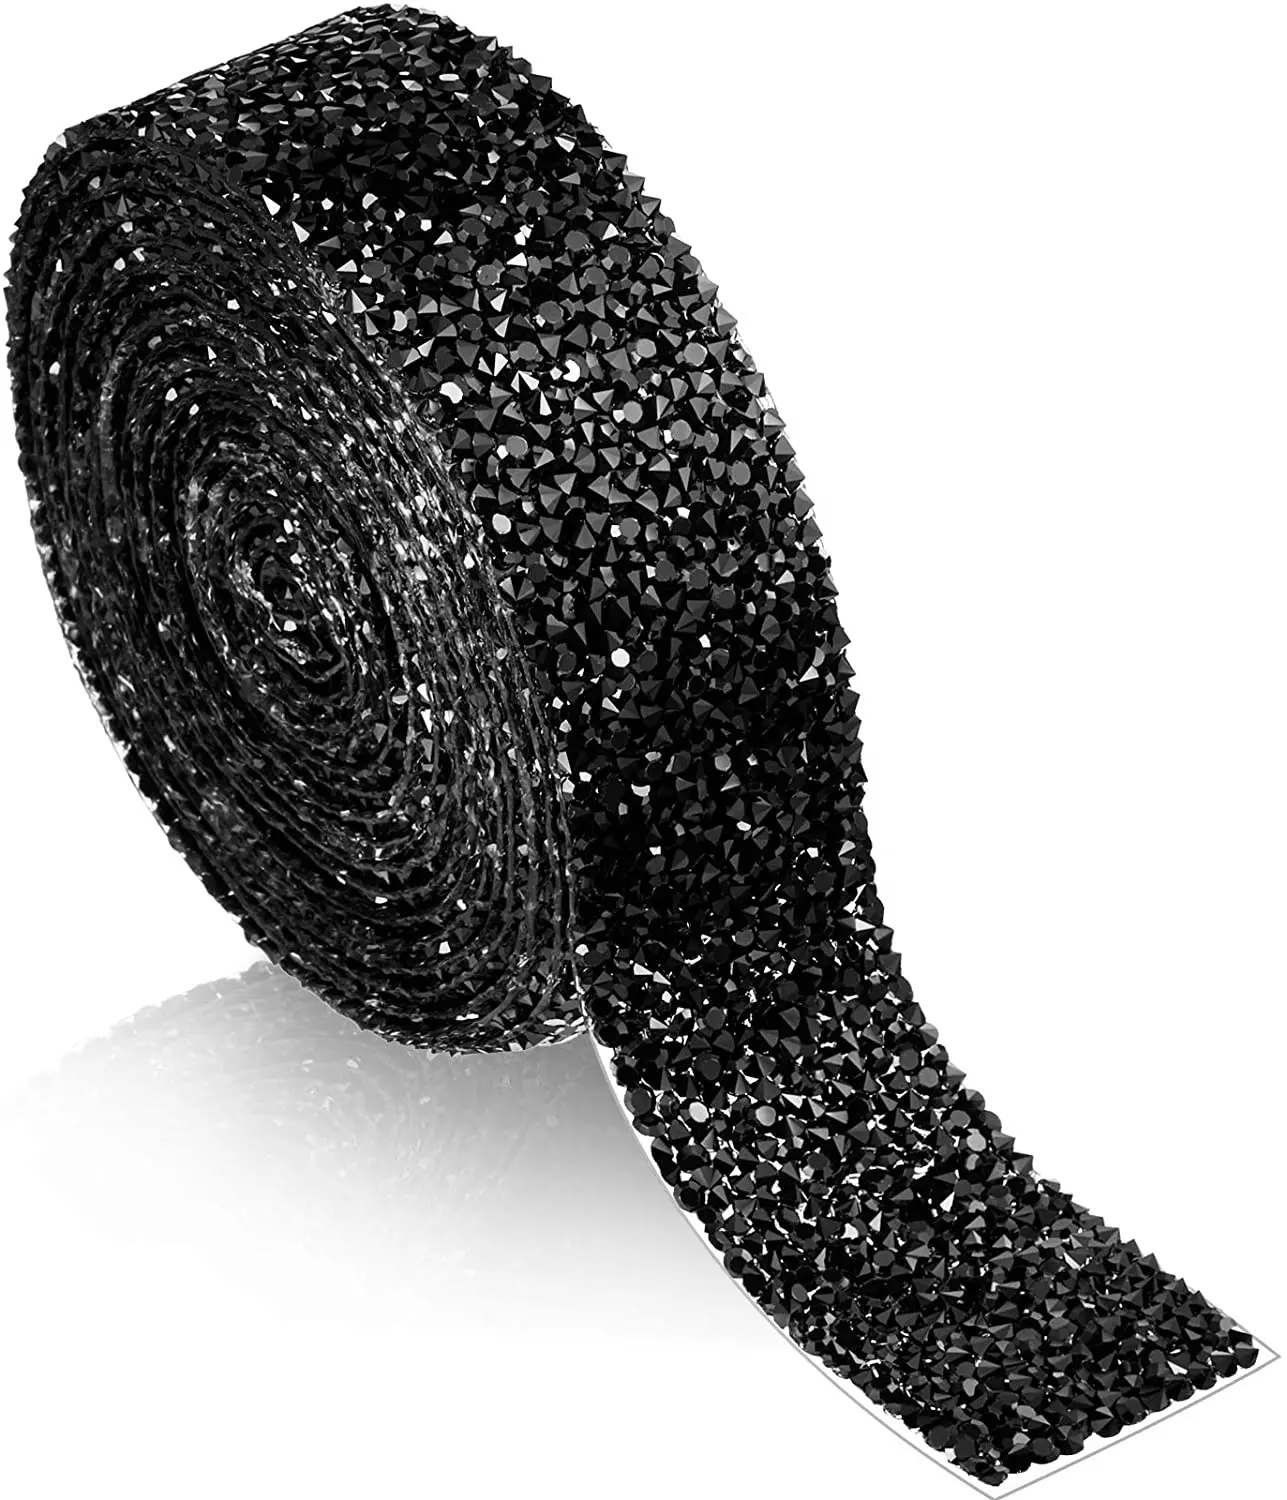 Shining Crystal Rhinestone Lint Resin Strass Trimmen Tape <span class=keywords><strong>Roll</strong></span> Voor Cakes Decoraties